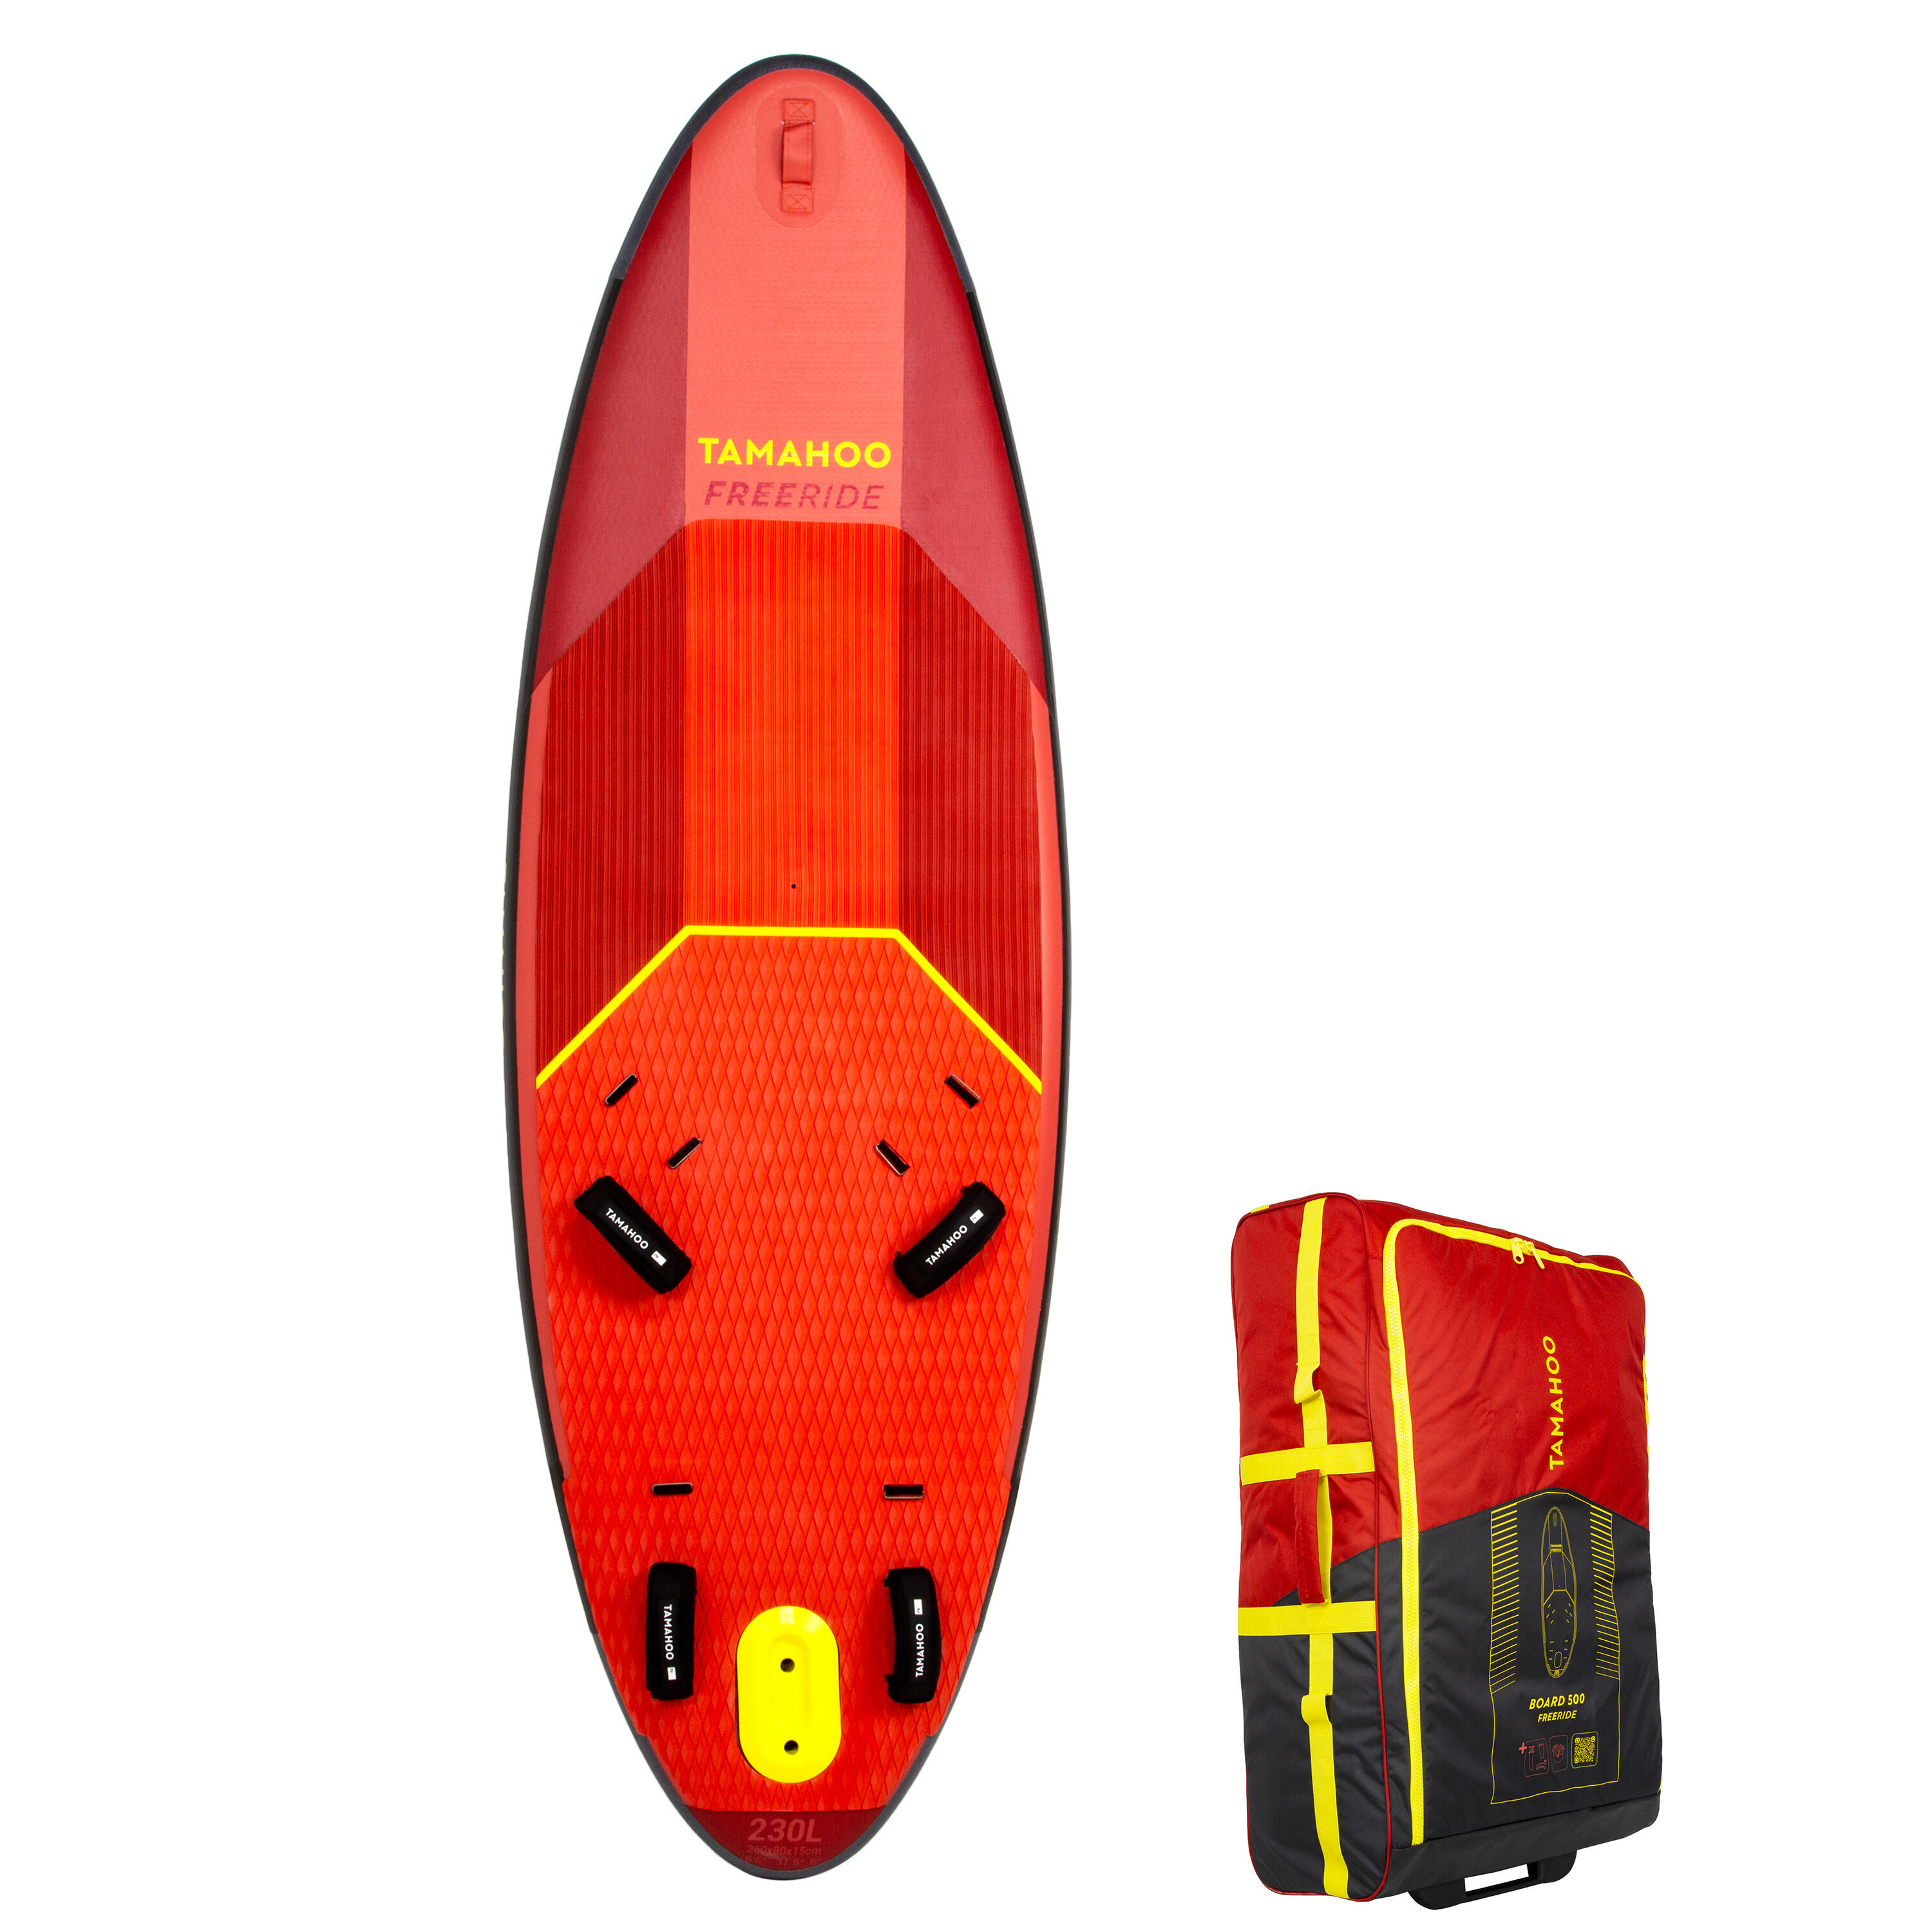 TAMAHOO INFLATABLE WINDSURFING BOARD FREE RIDE 500 - RED